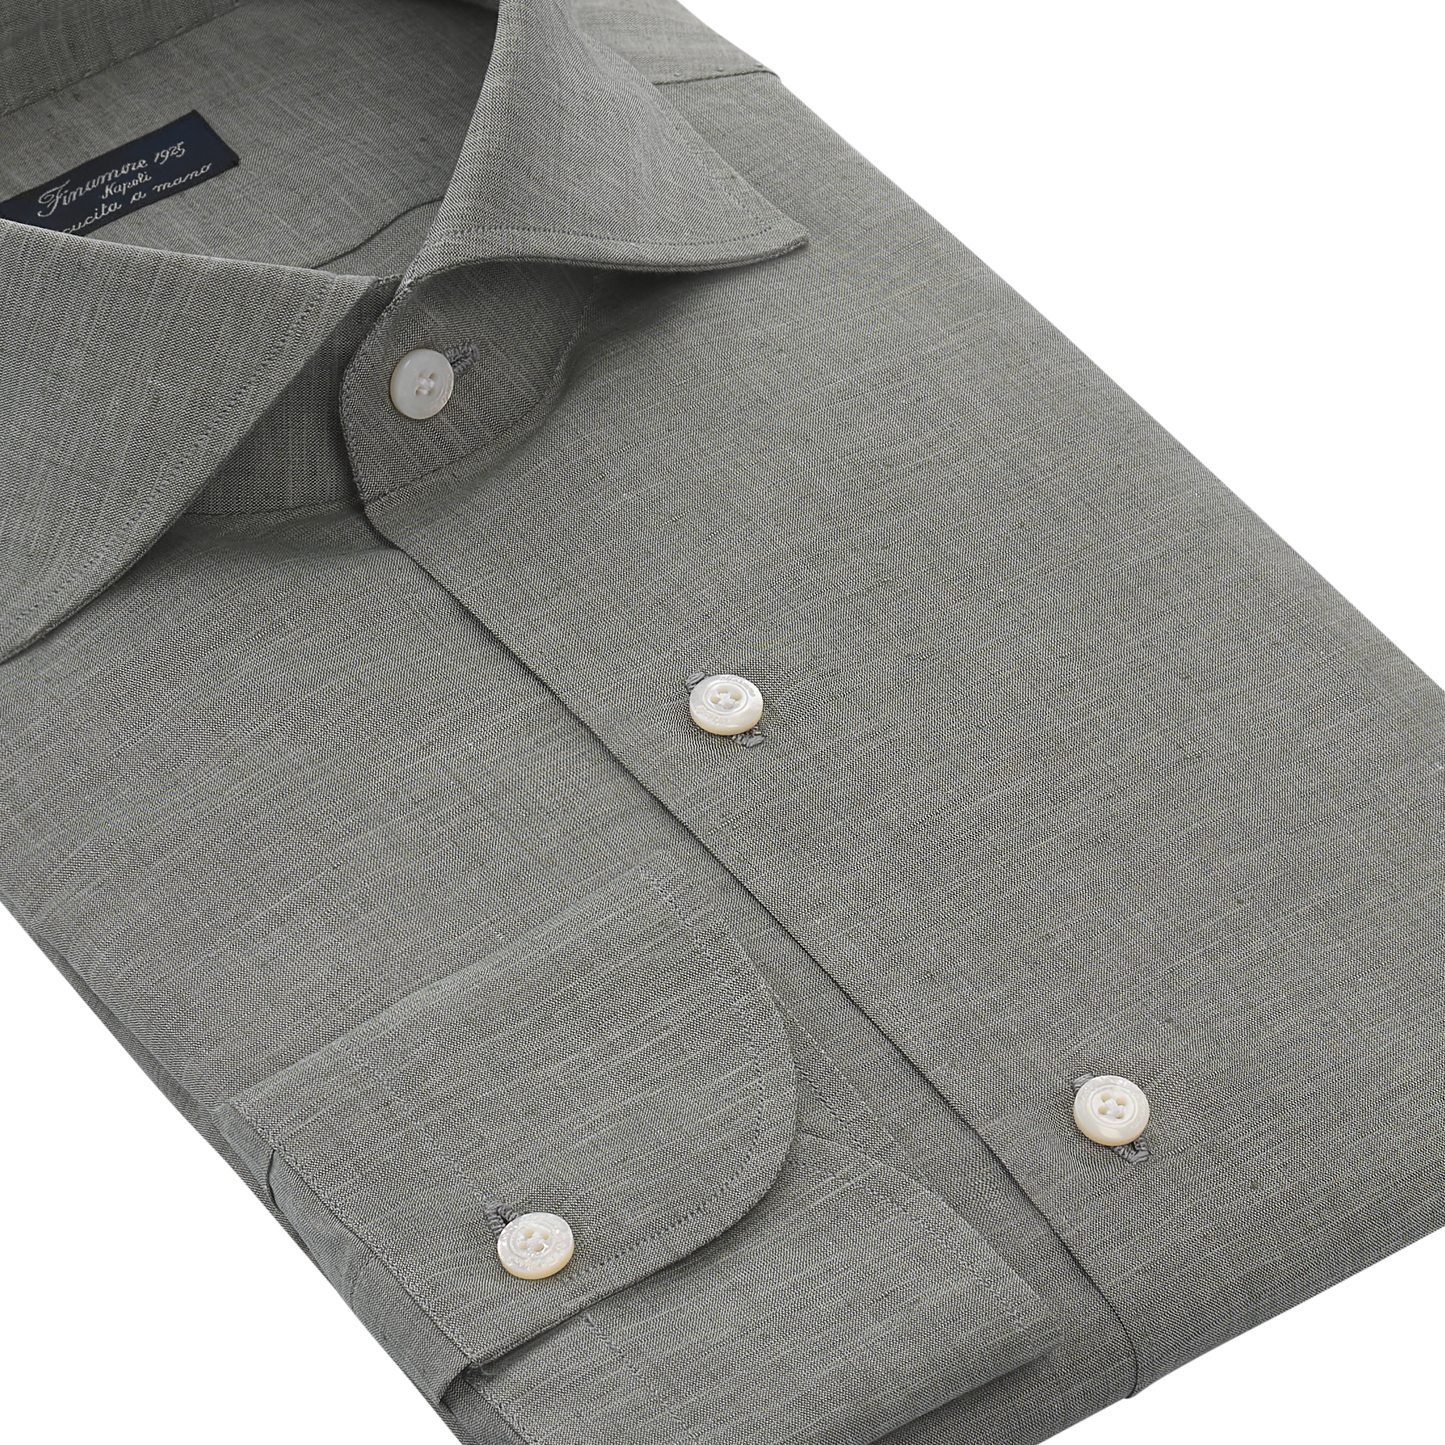 Classic Napoli Shirt in Sage Green